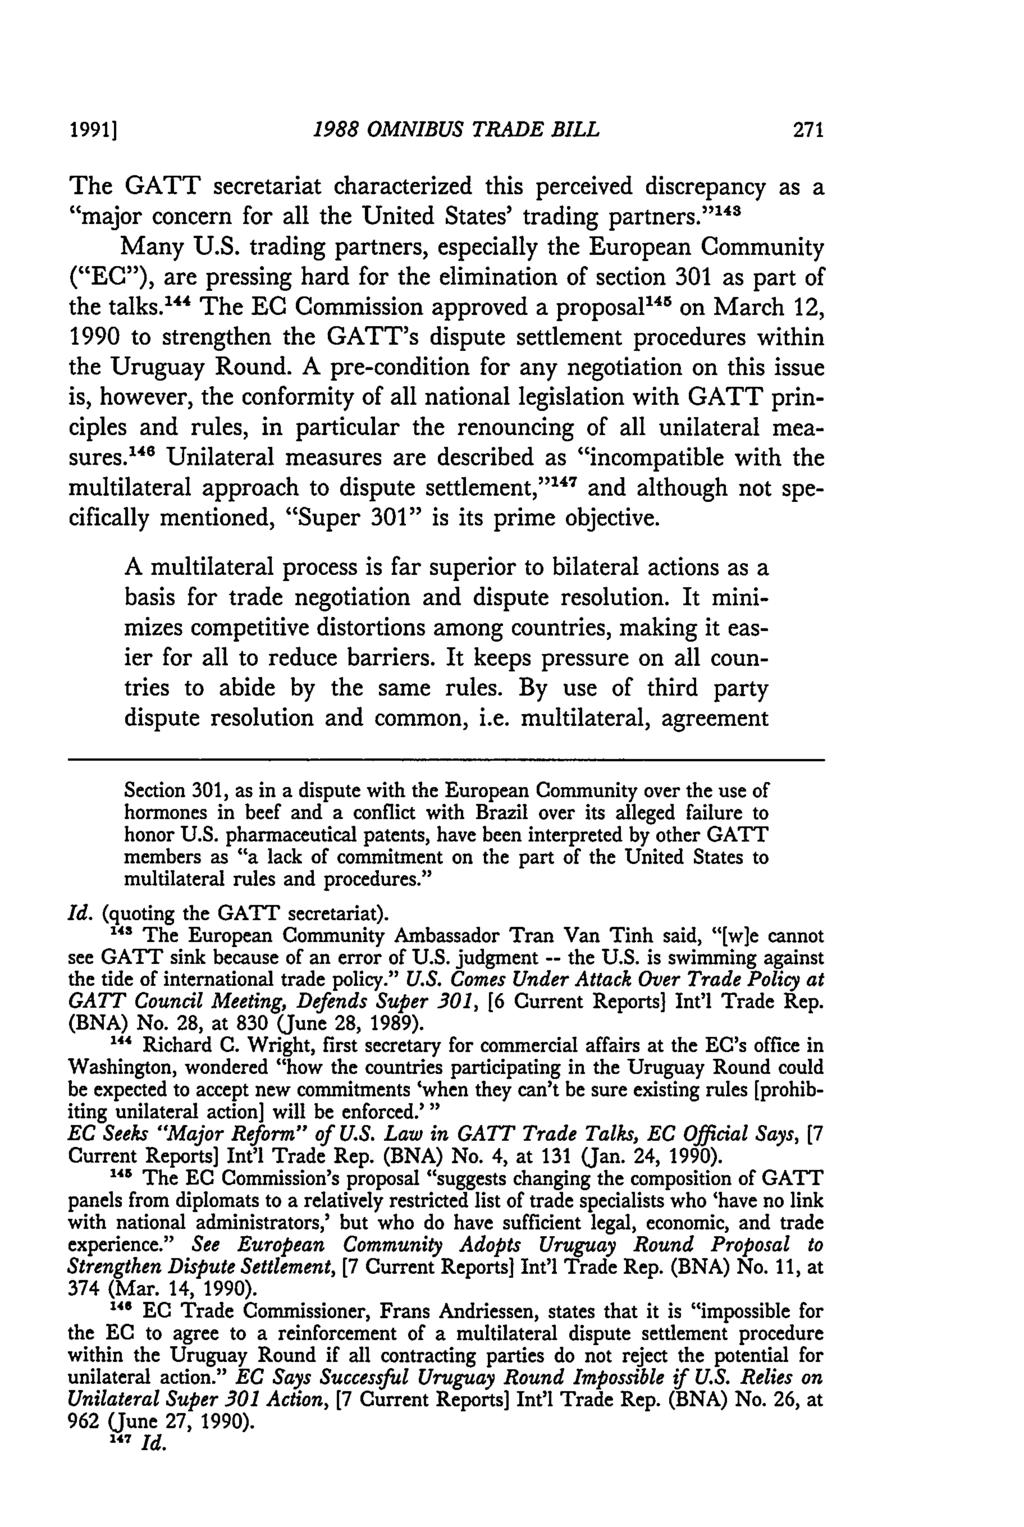 1991] 1988 OMNIBUS TRADE BILL The GATT secretariat characterized this perceived discrepancy as a "major concern for all the United States' trading partners." 14 Many U.S. trading partners, especially the European Community ("EC"), are pressing hard for the elimination of section 301 as part of the talks.